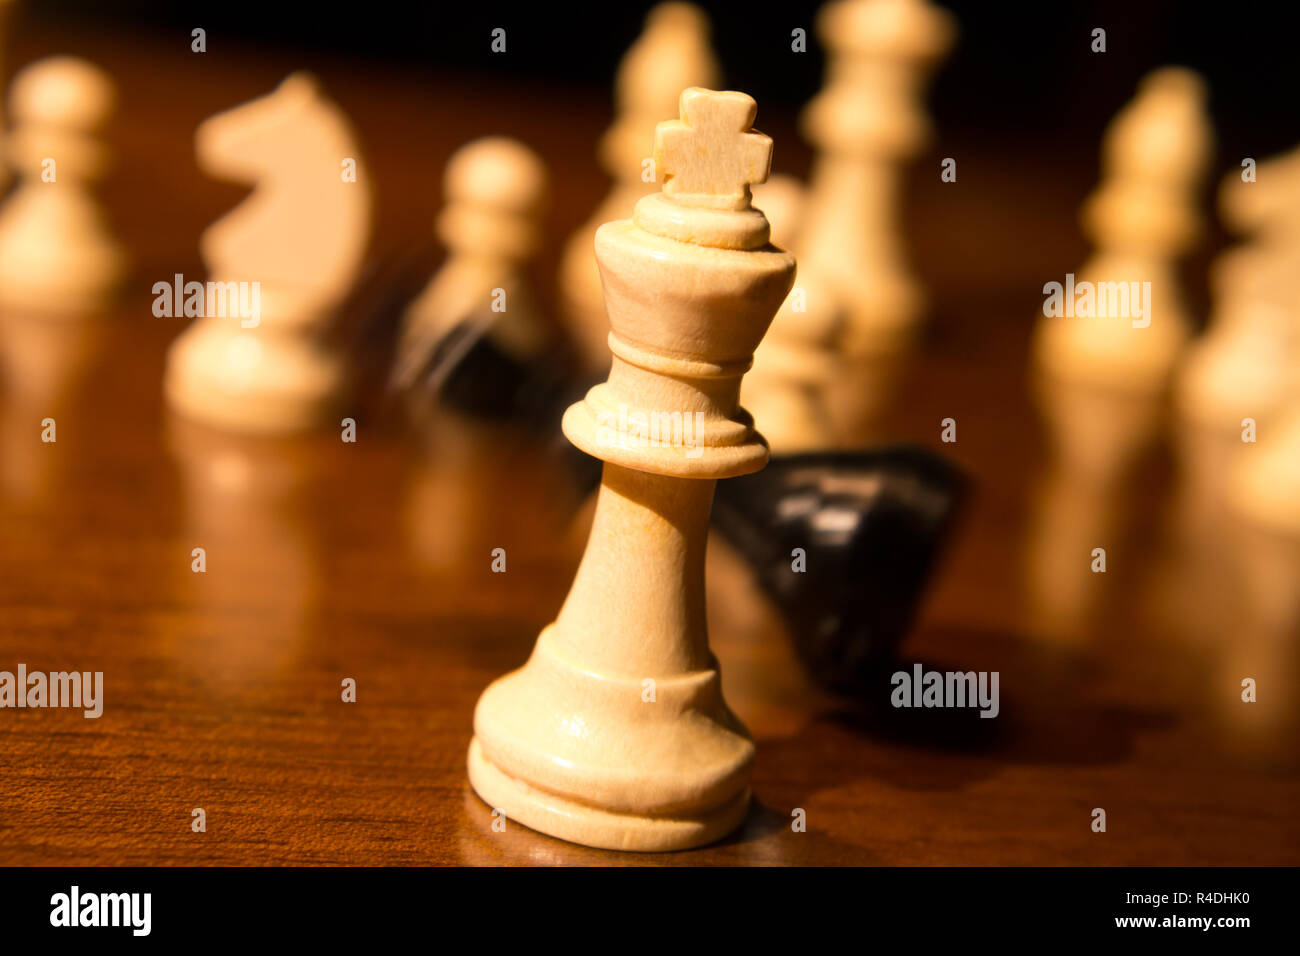 Tumbling Chess Knight In 3d Background, Chess King, Checkmate